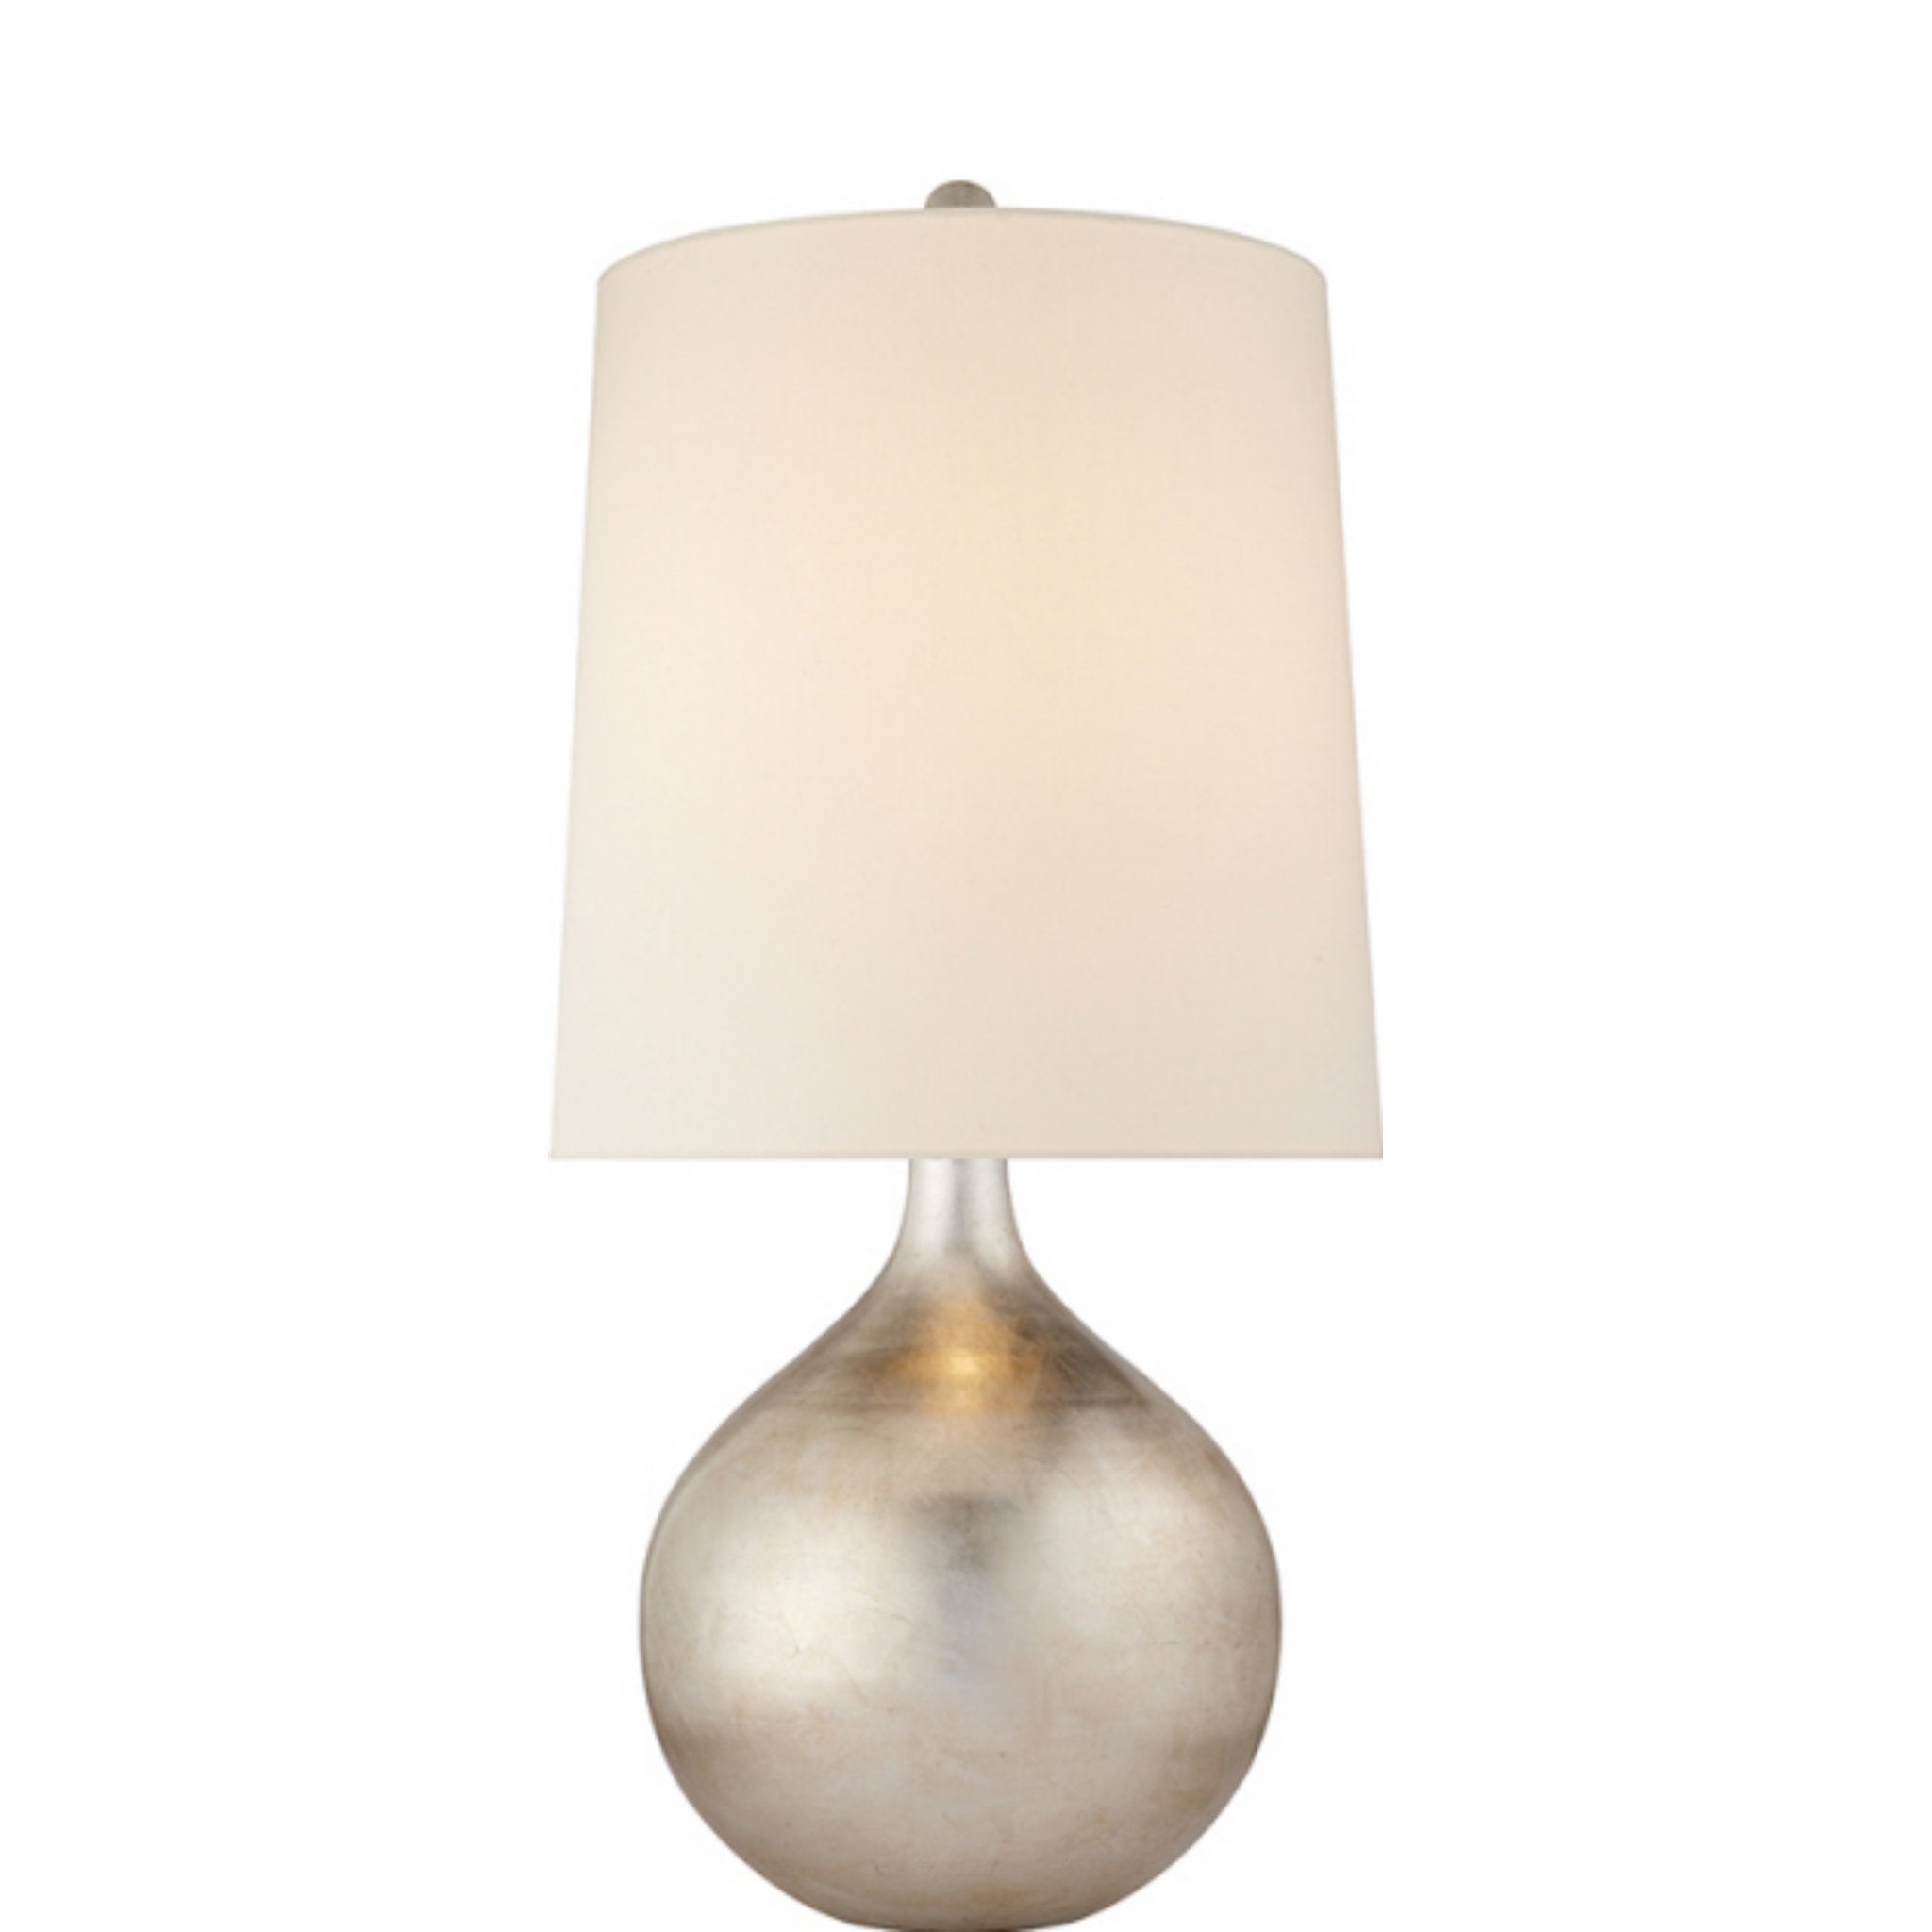 AERIN Warren Table Lamp in Burnished Silver Leaf with Linen Shade